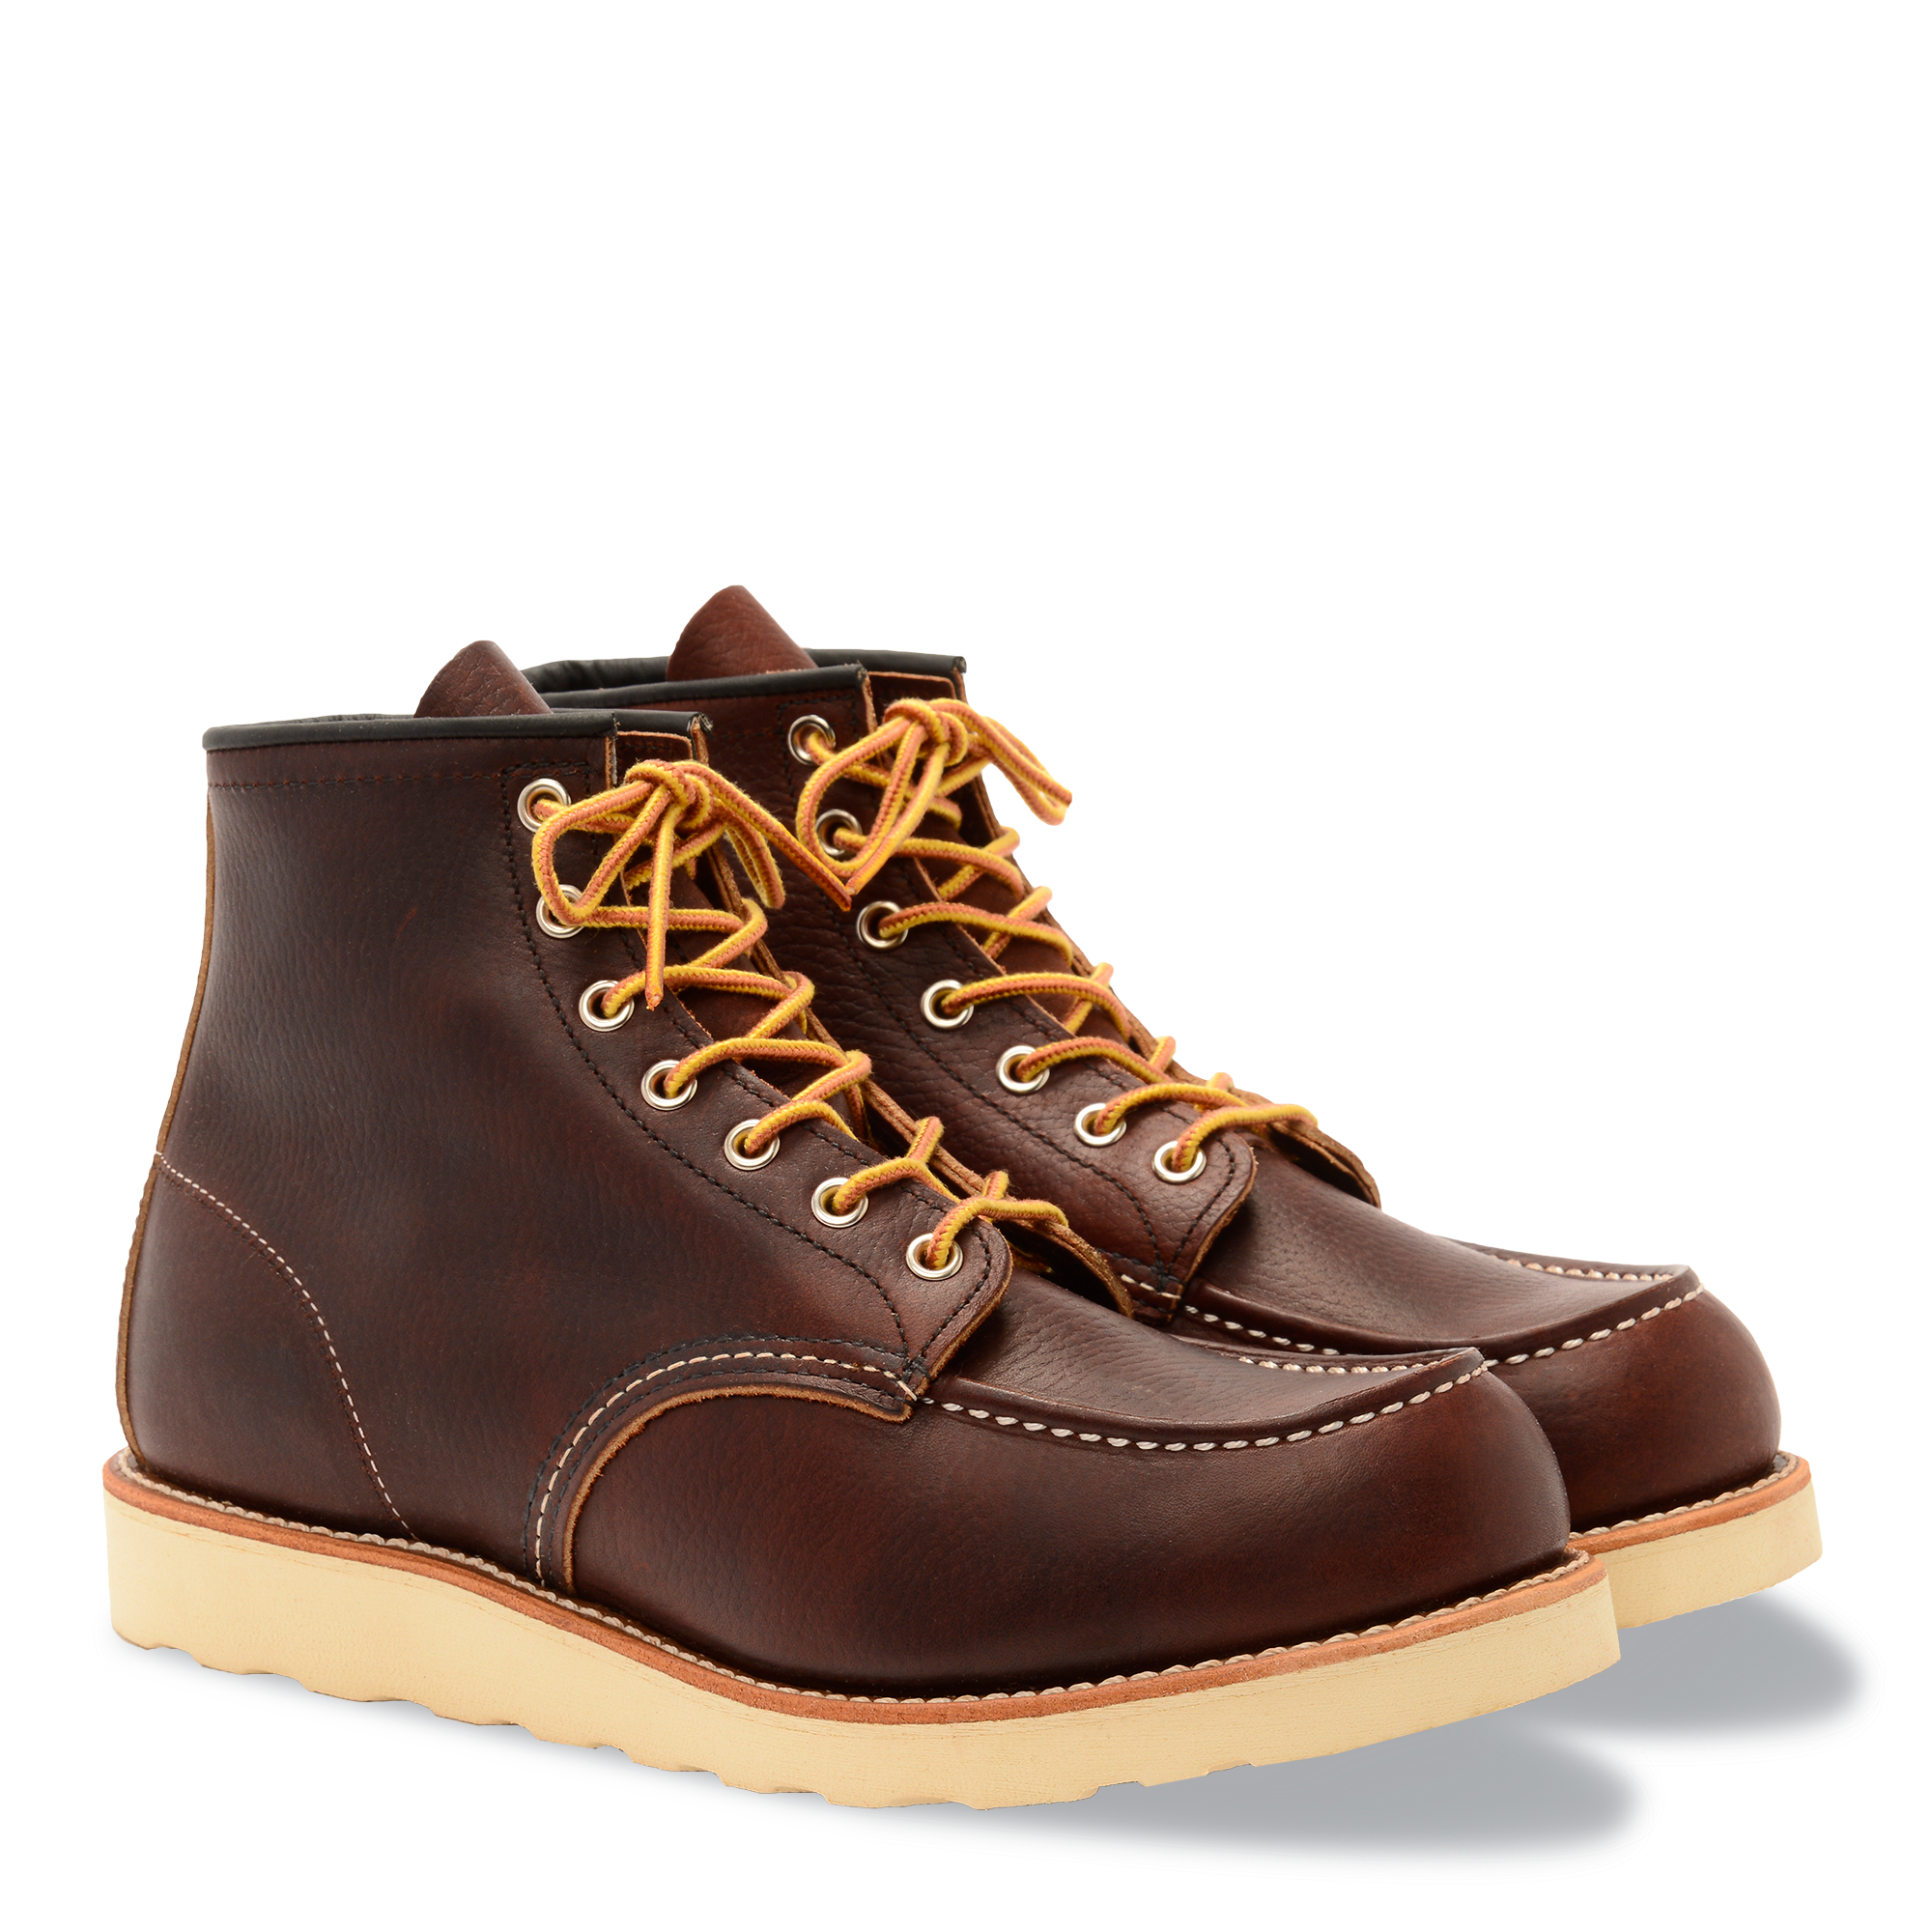 Classic Moc Toe Boots 8849 - Red Wing